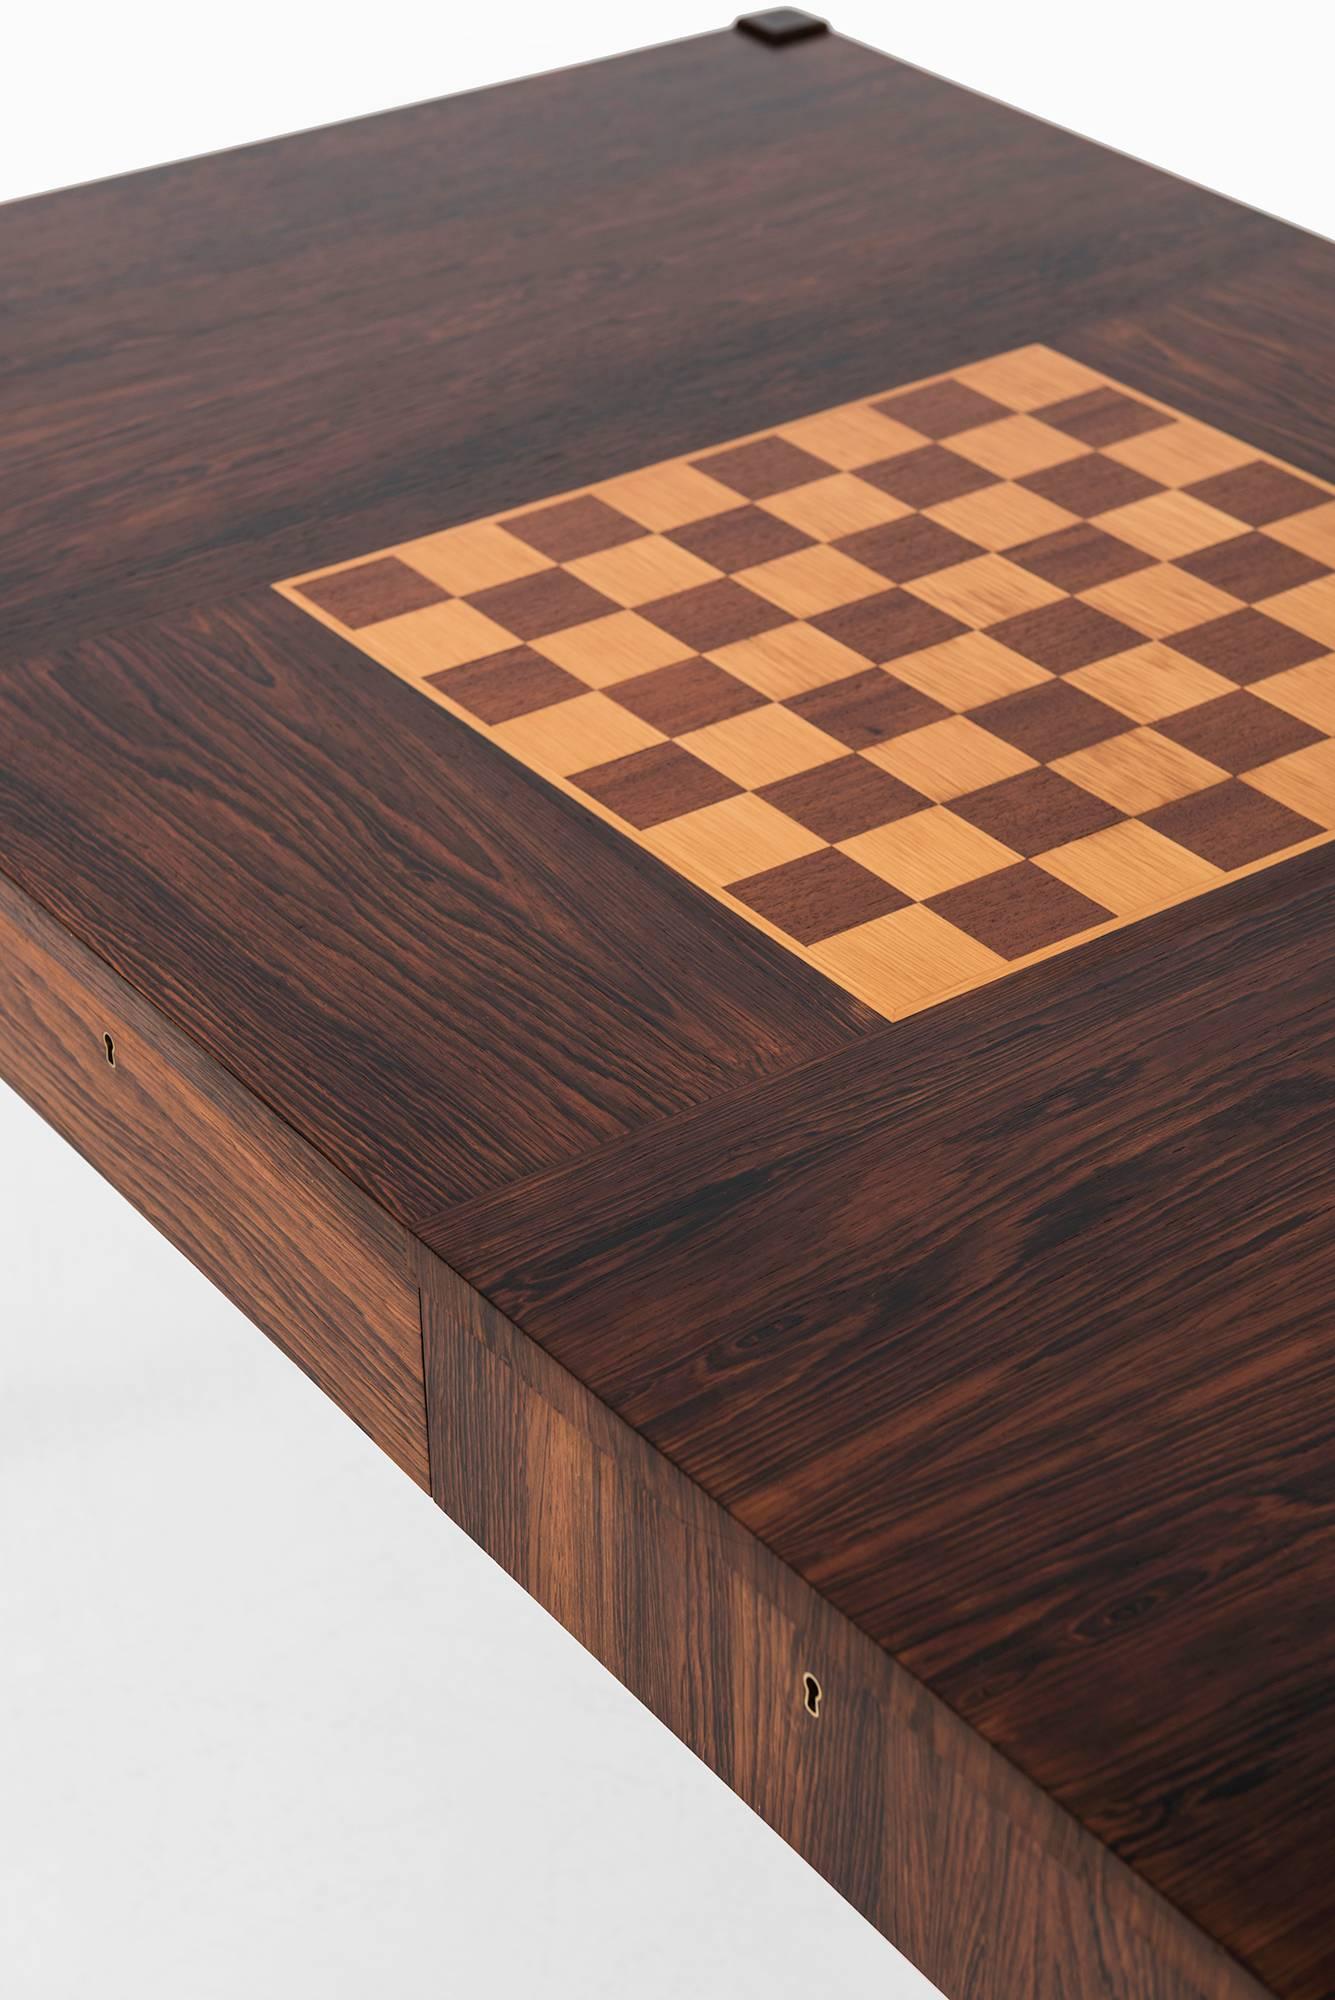 Very rare and most likely unique rosewood desk with chessboard on top. Produced in Sweden.